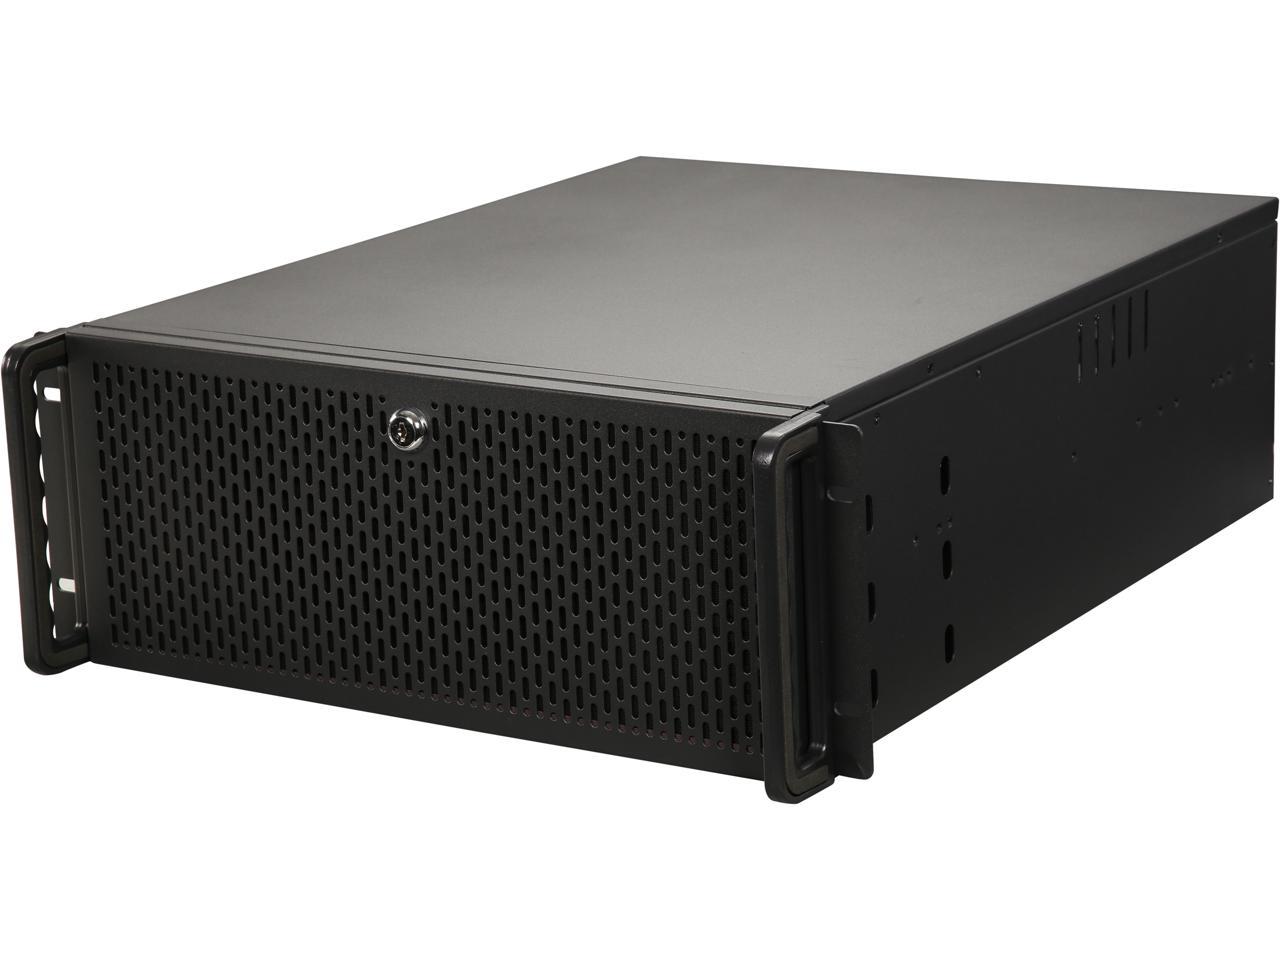 Rosewill RSV-4310 Server Case or Chassis, 4U Rackmount - 4 x Included